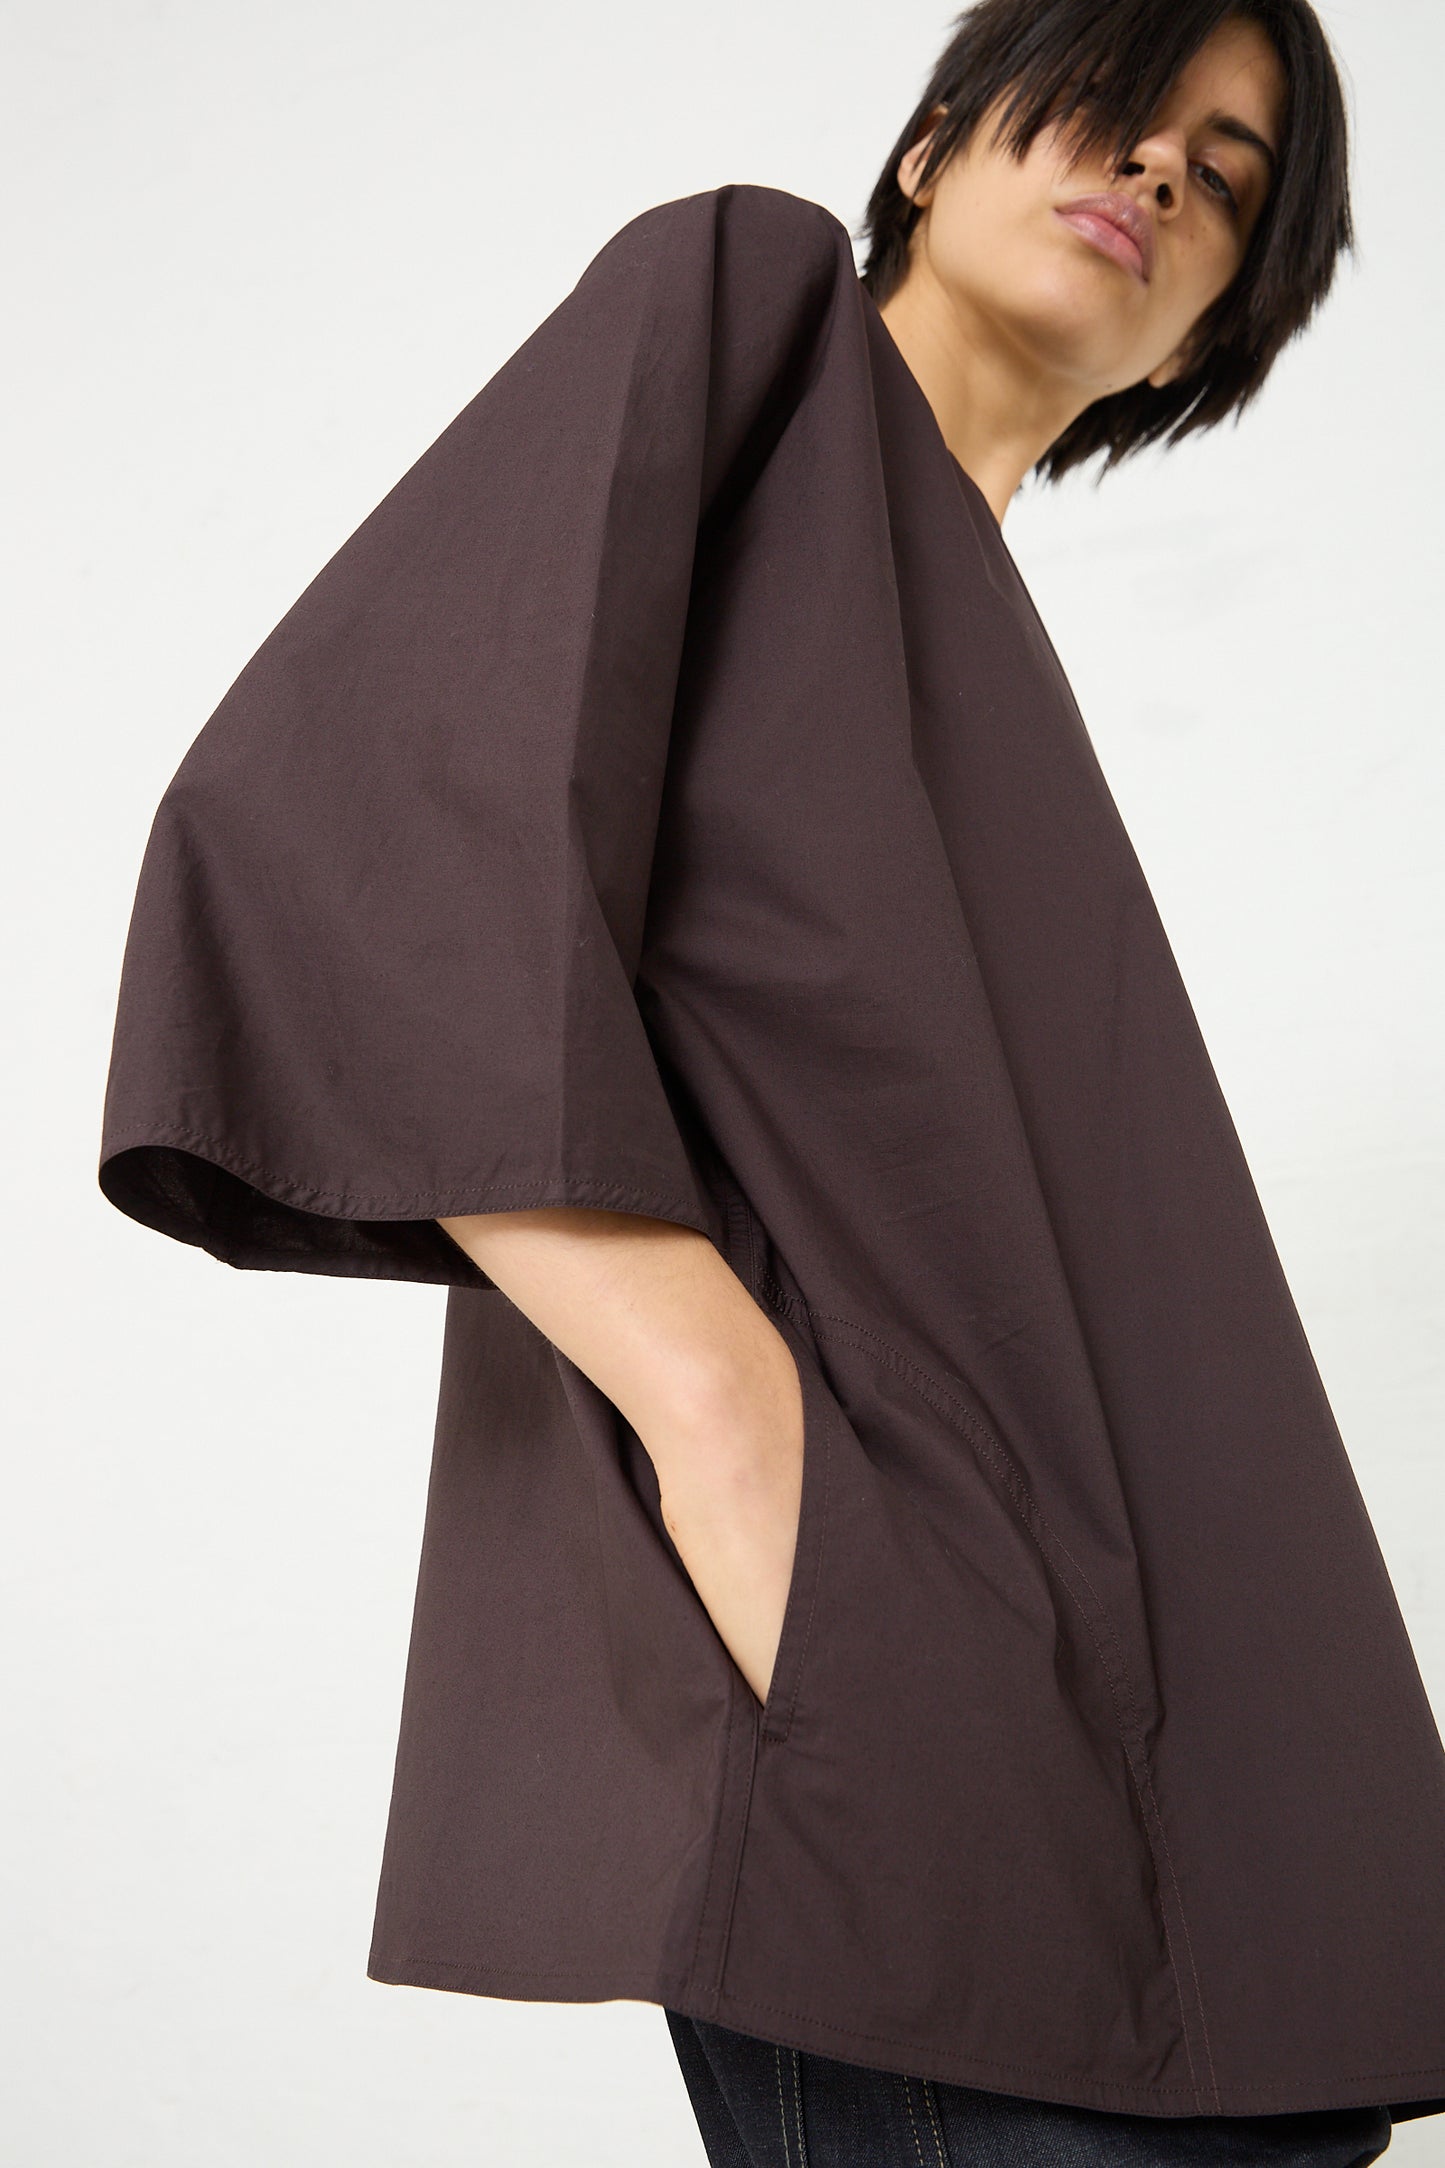 The model is wearing a brown-colored Cotton Poplin Bendol Top by Sofie D'Hoore, with side seam pockets, featuring an oversized fit. Side view.